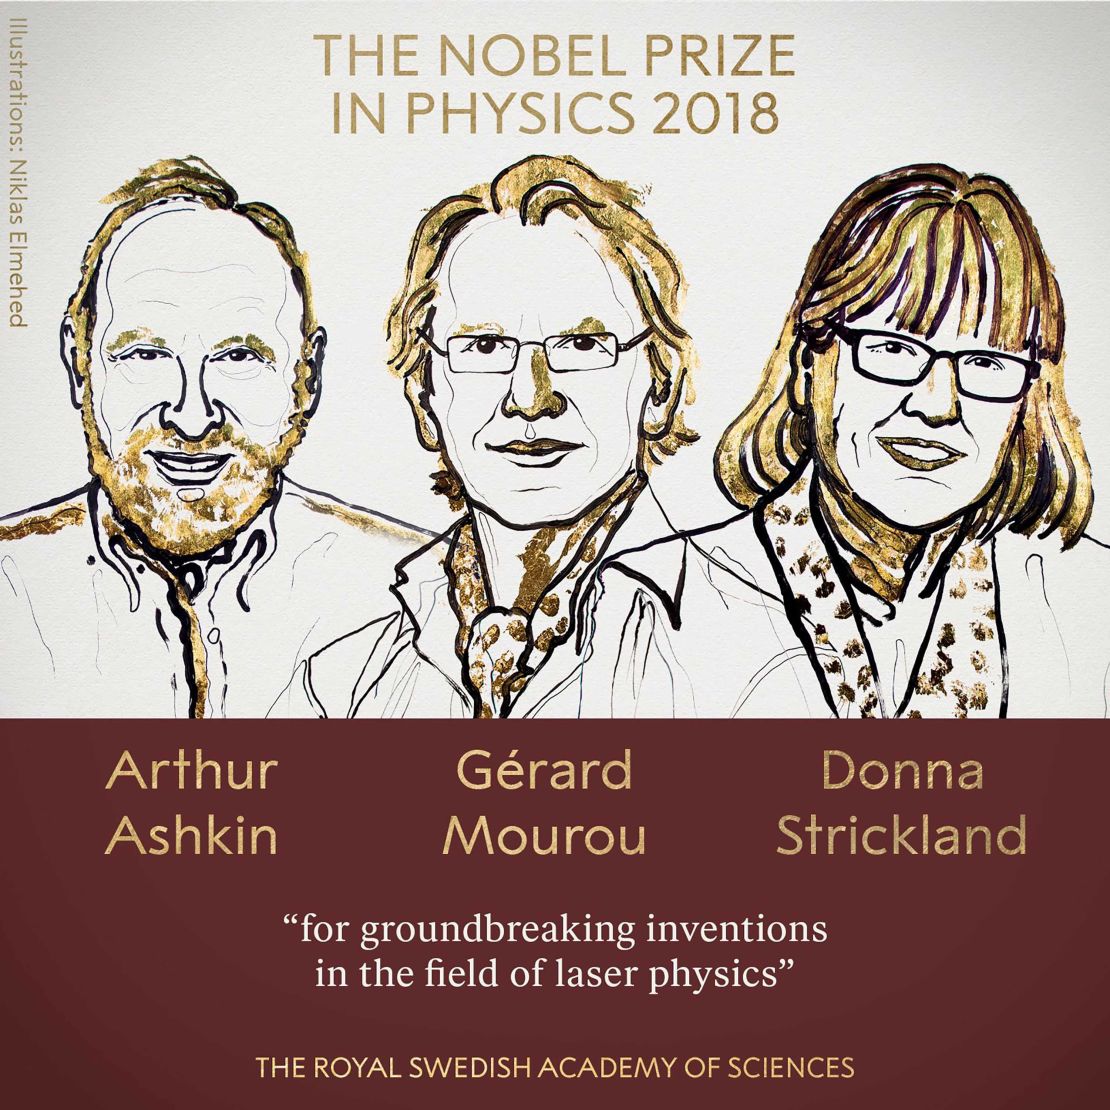 An illustration of the 2018 Nobel Prize in Physics winners.